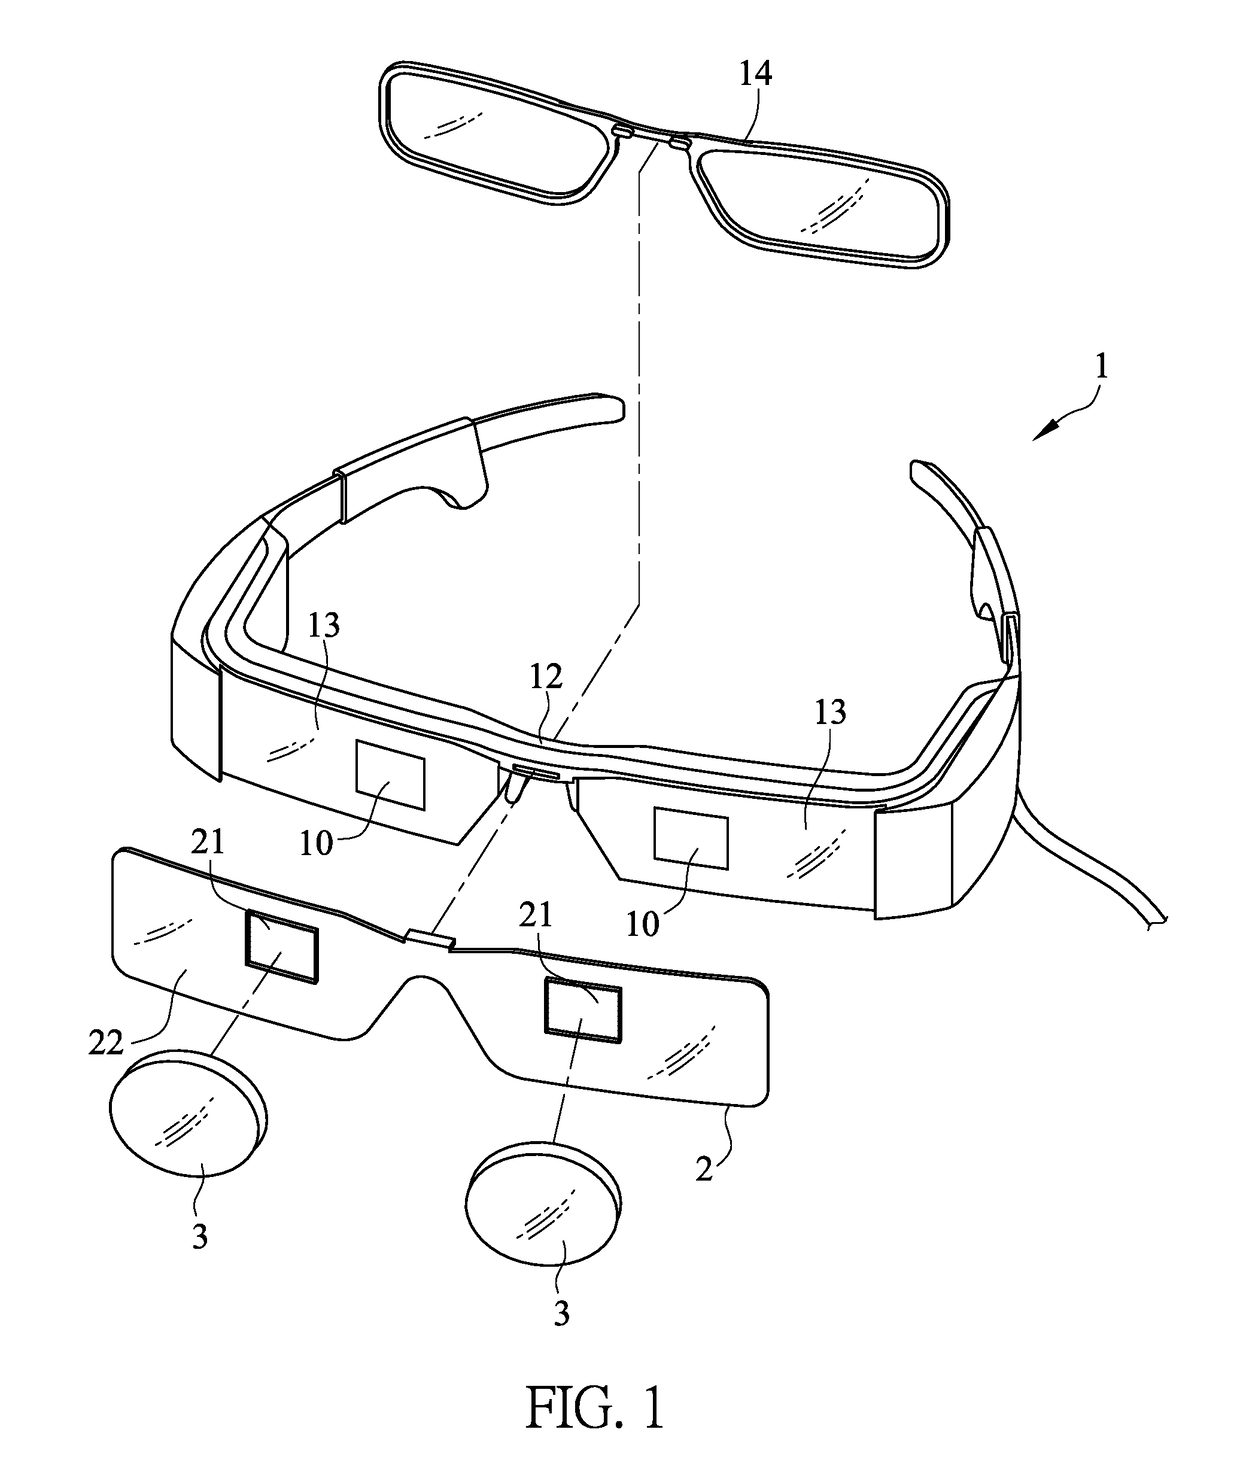 Eye-protective shade for augmented reality smart glasses